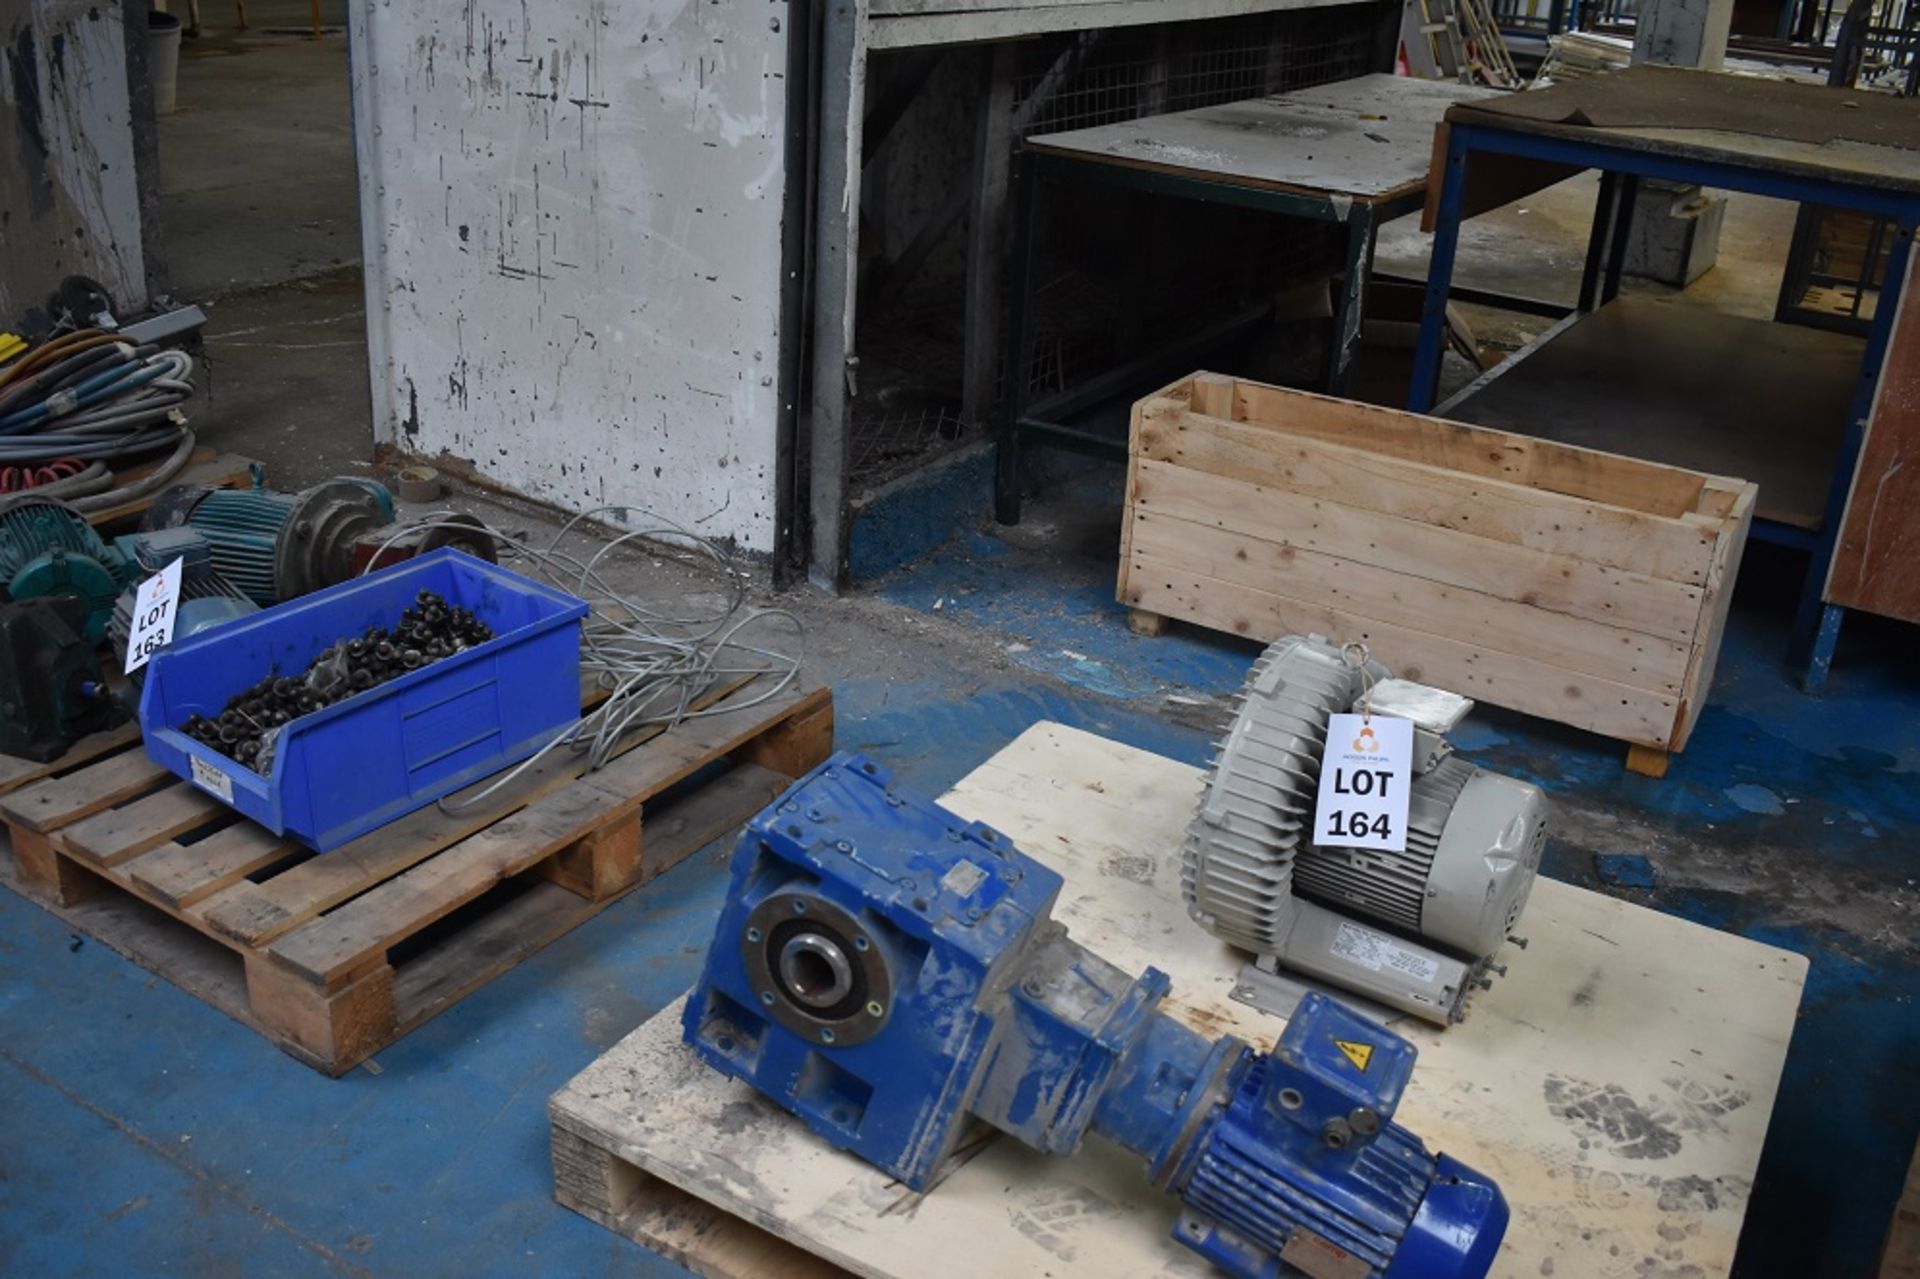 1 X LENZI GEARBOX & MOTOR & 1 X HOHSING RING COMPRESSOR (LIFT OUT £10.00) - Image 2 of 2